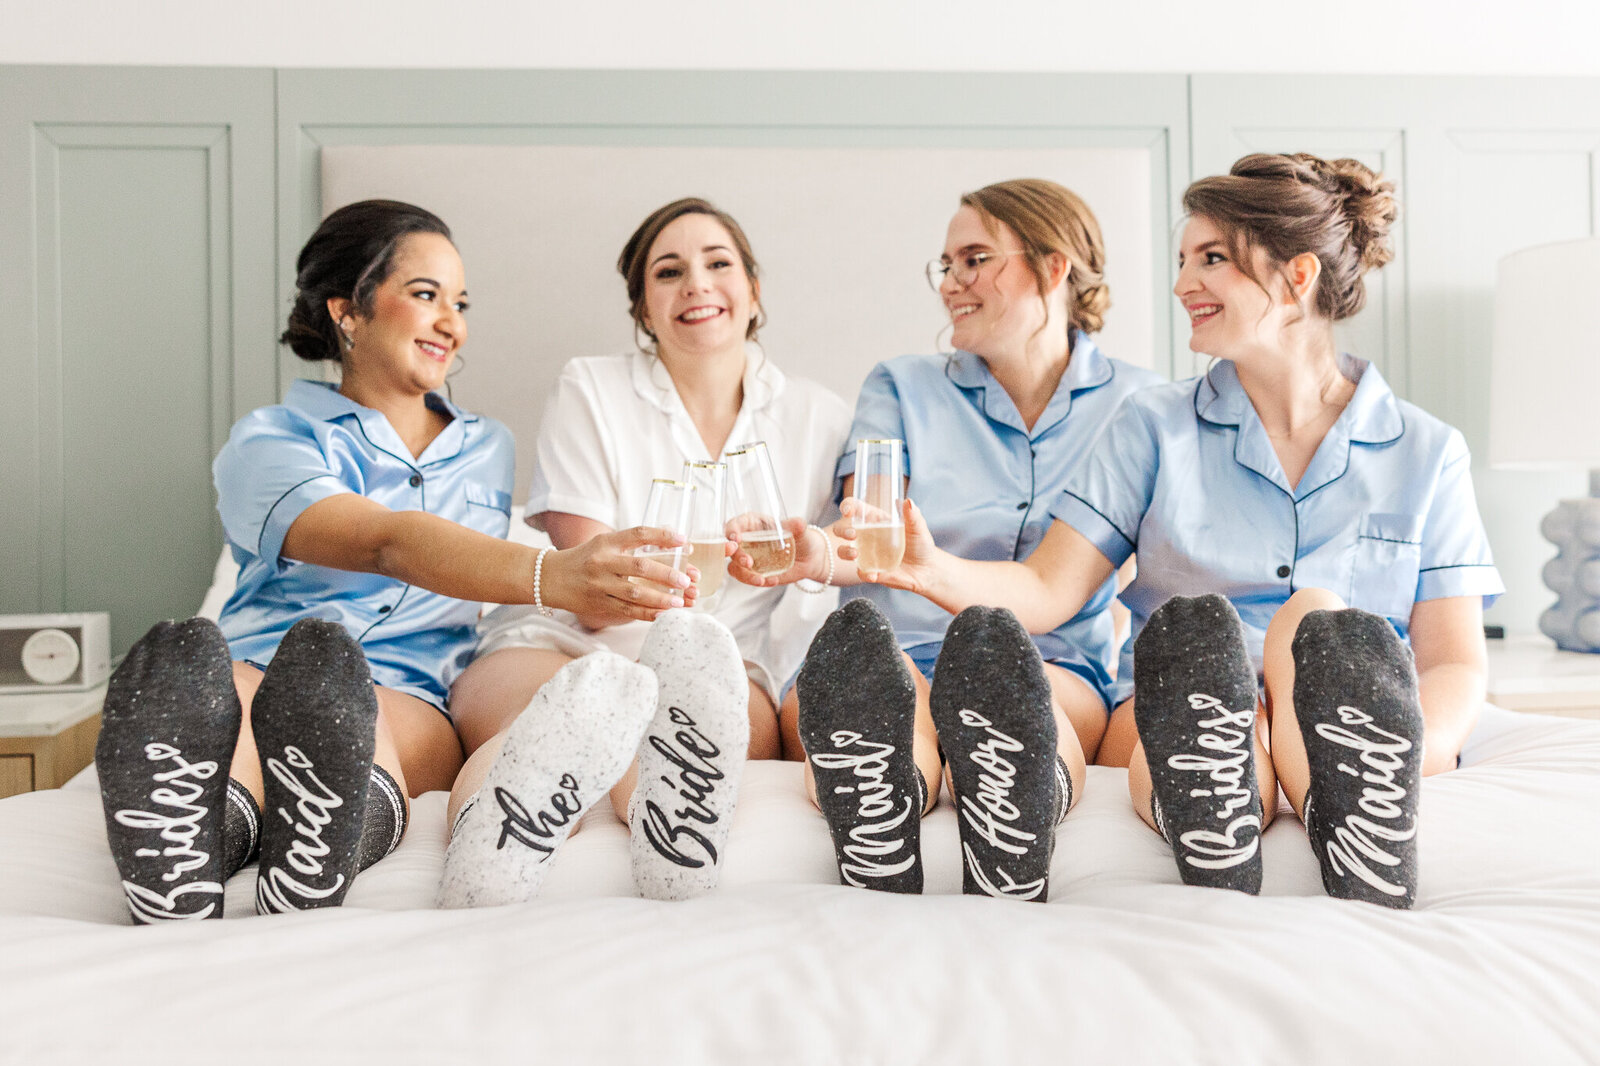 a bride and her bridesmaids show off their socks while cheersing their drinks